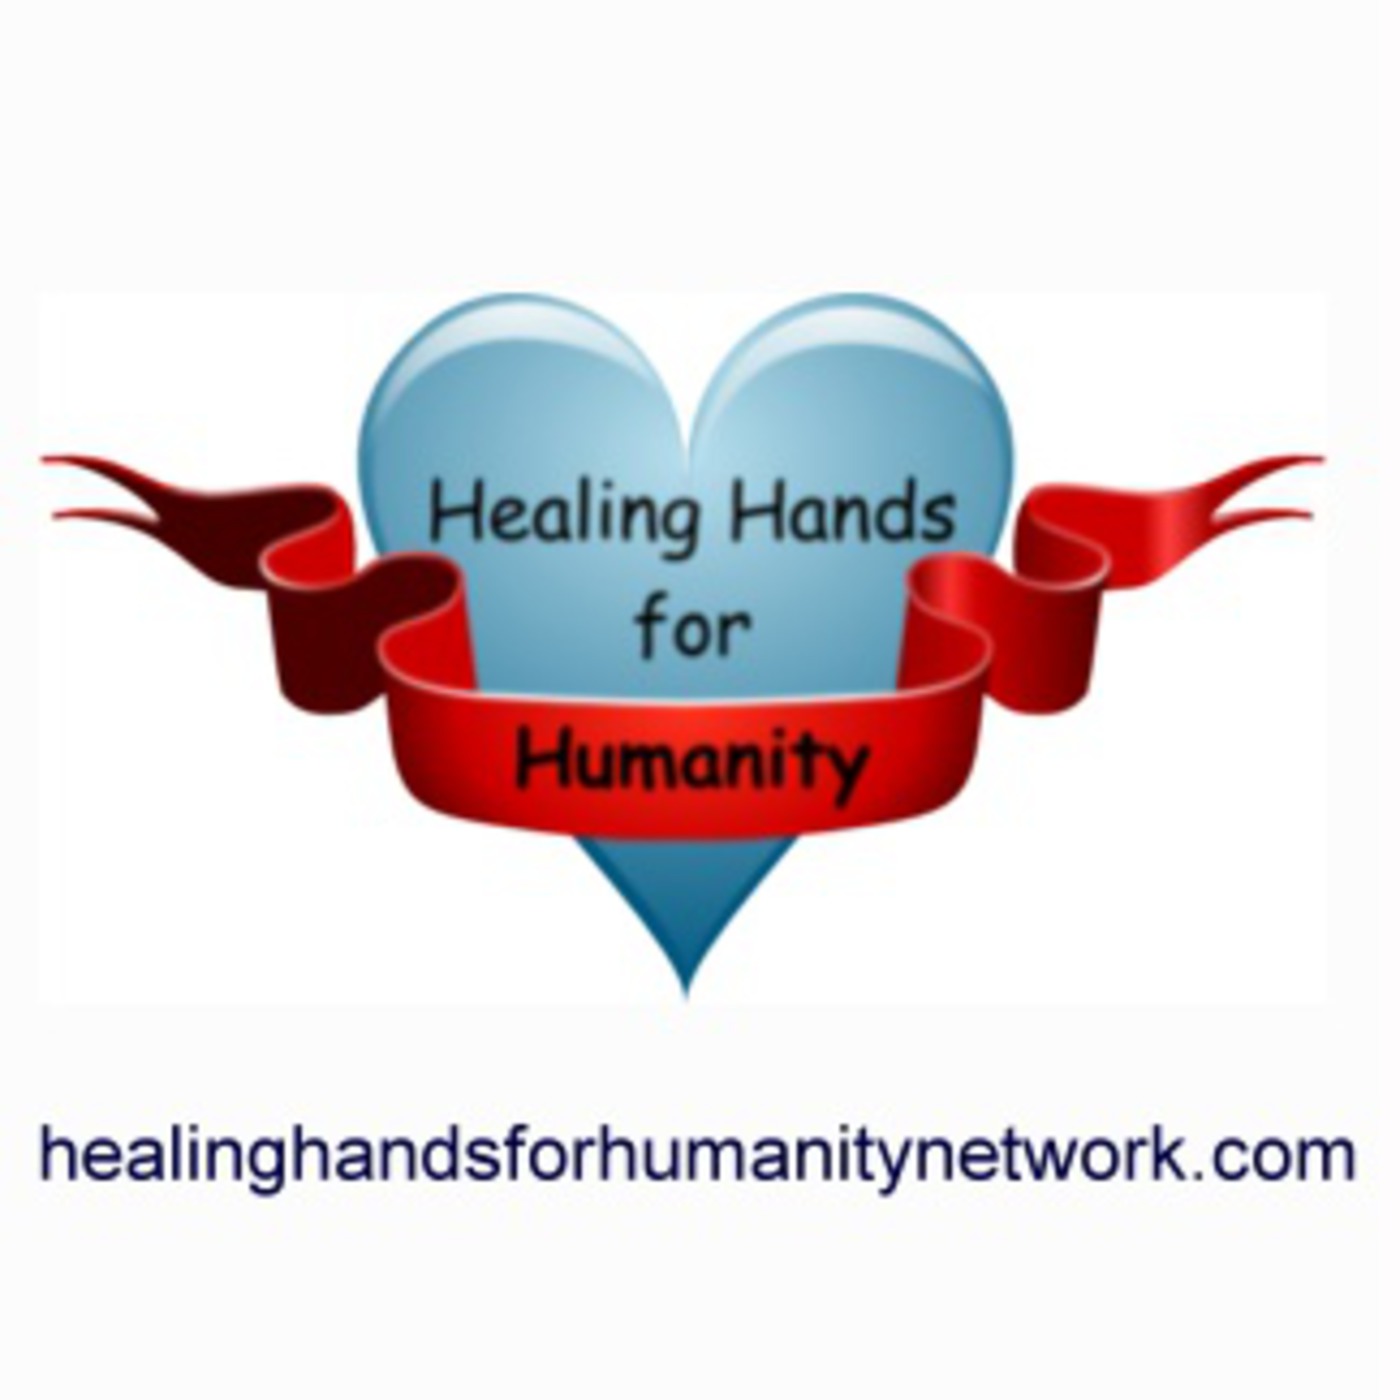 Healing Hands for Humanity